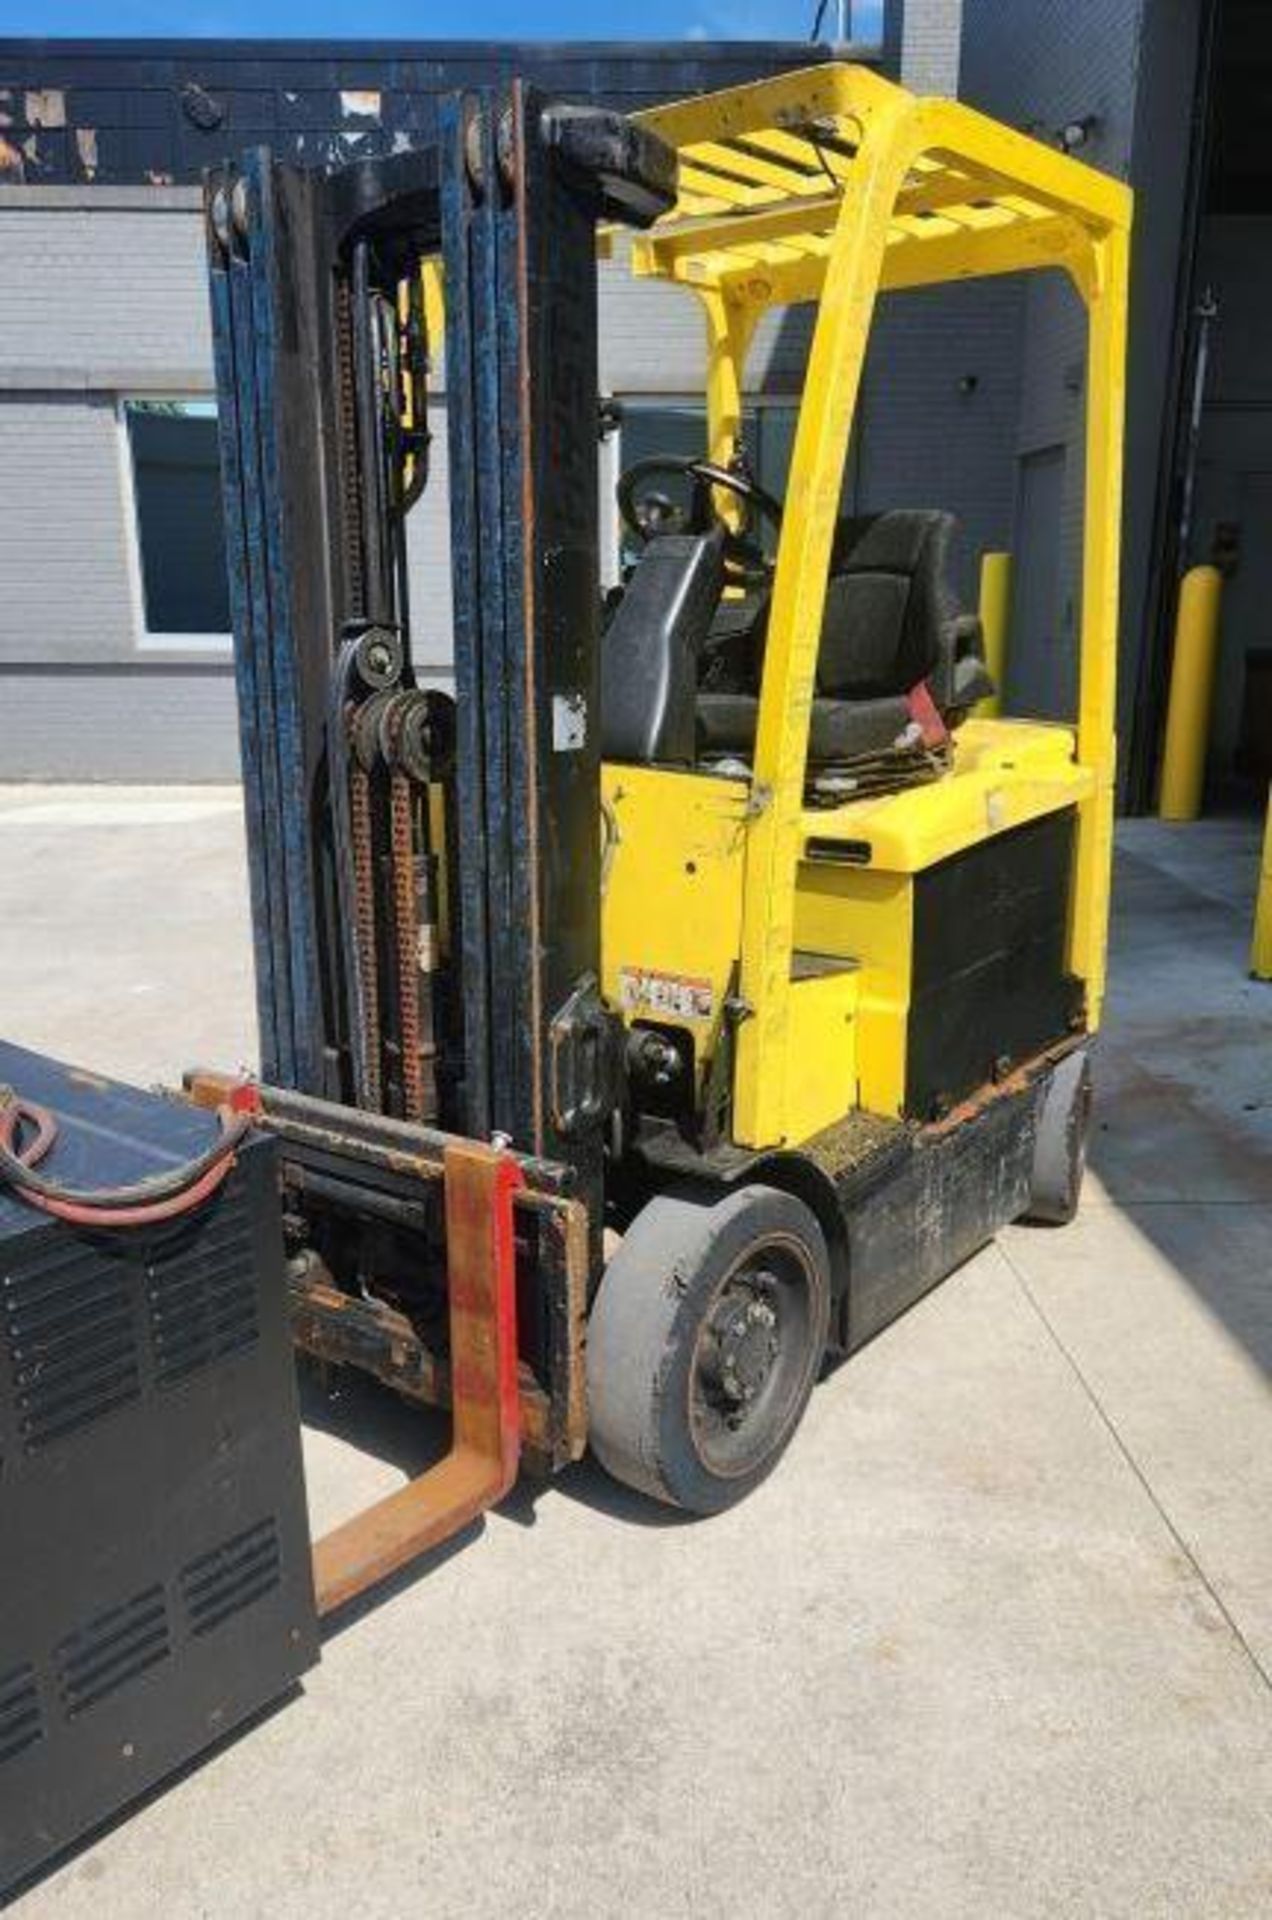 2013 Hyster E45XN-33 Electric Forklift - Image 2 of 8